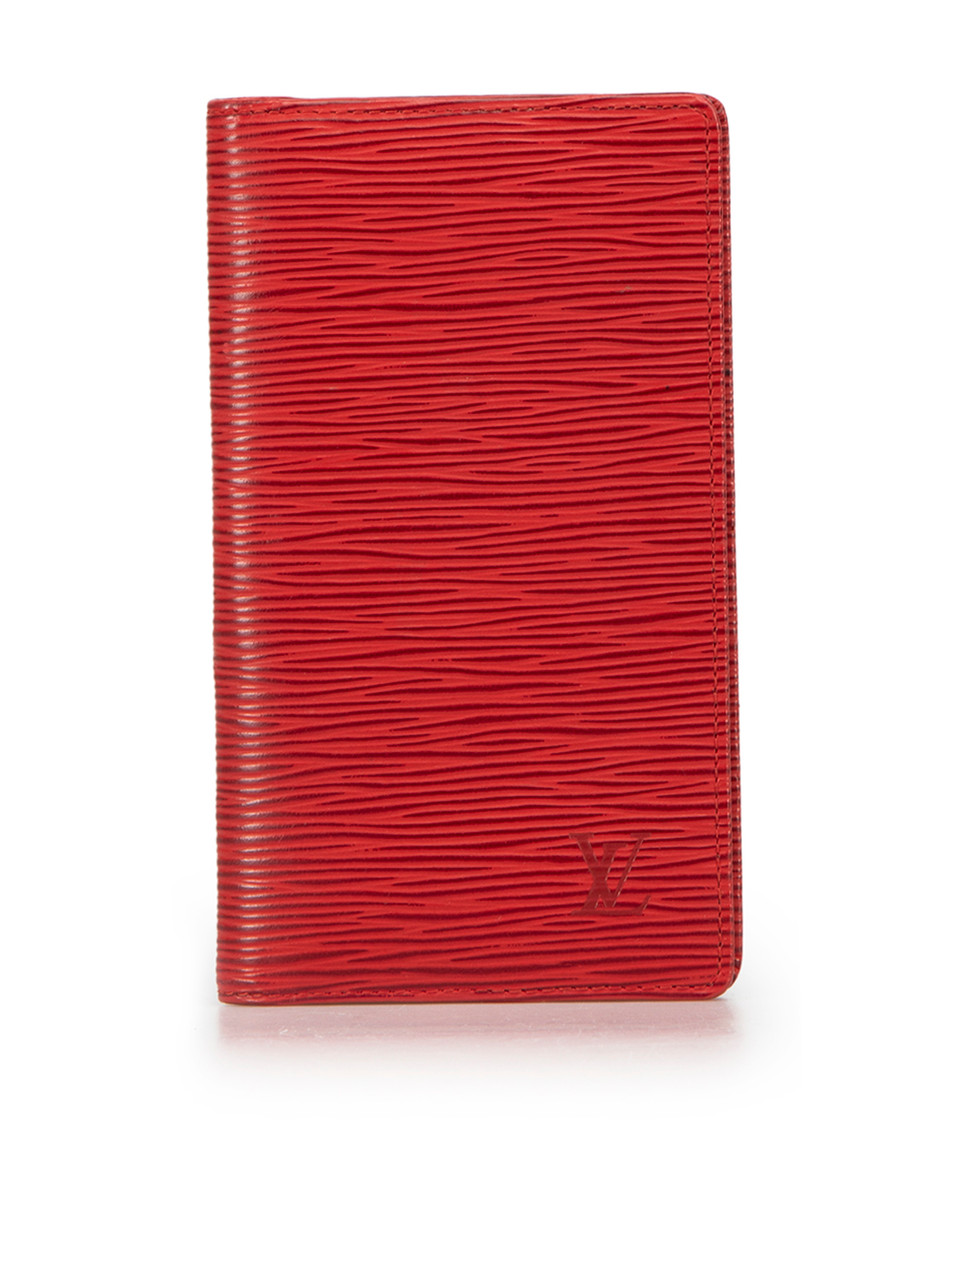 Louis Vuitton - Passport Cover Epi Leather Red